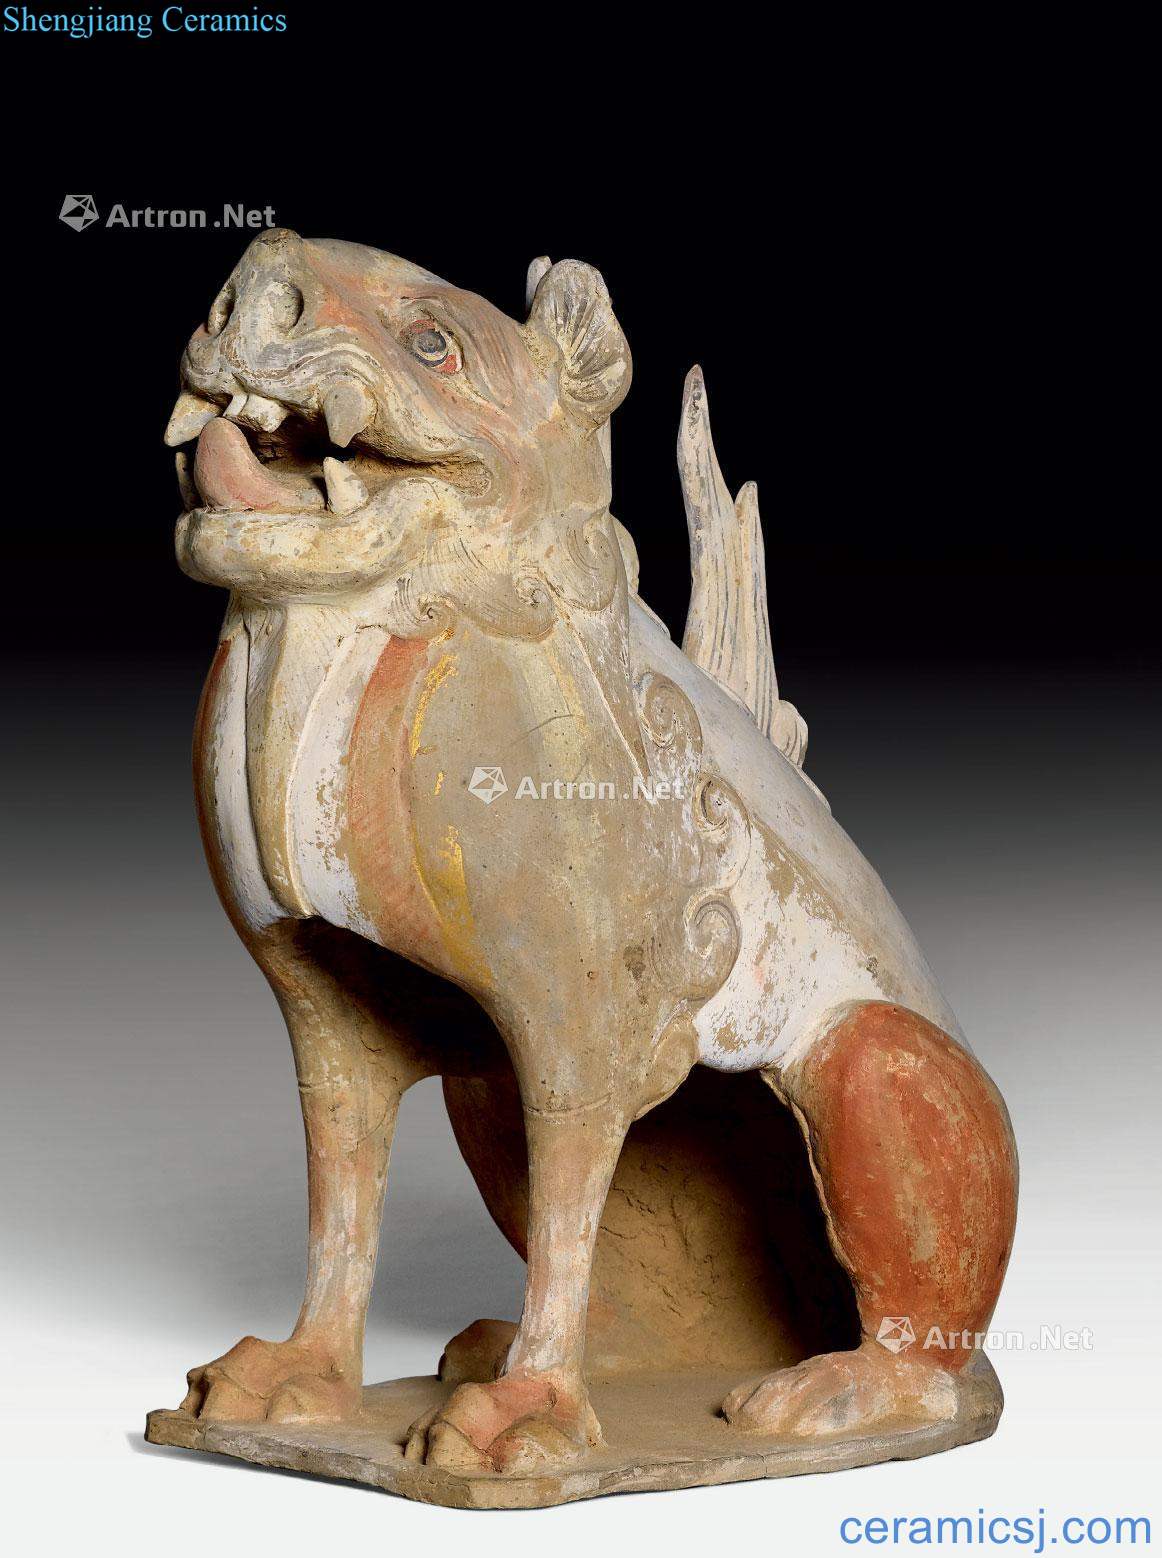 Tang dynasty made A POTTERY FIGURE OF AN EARTH SPIRIT.